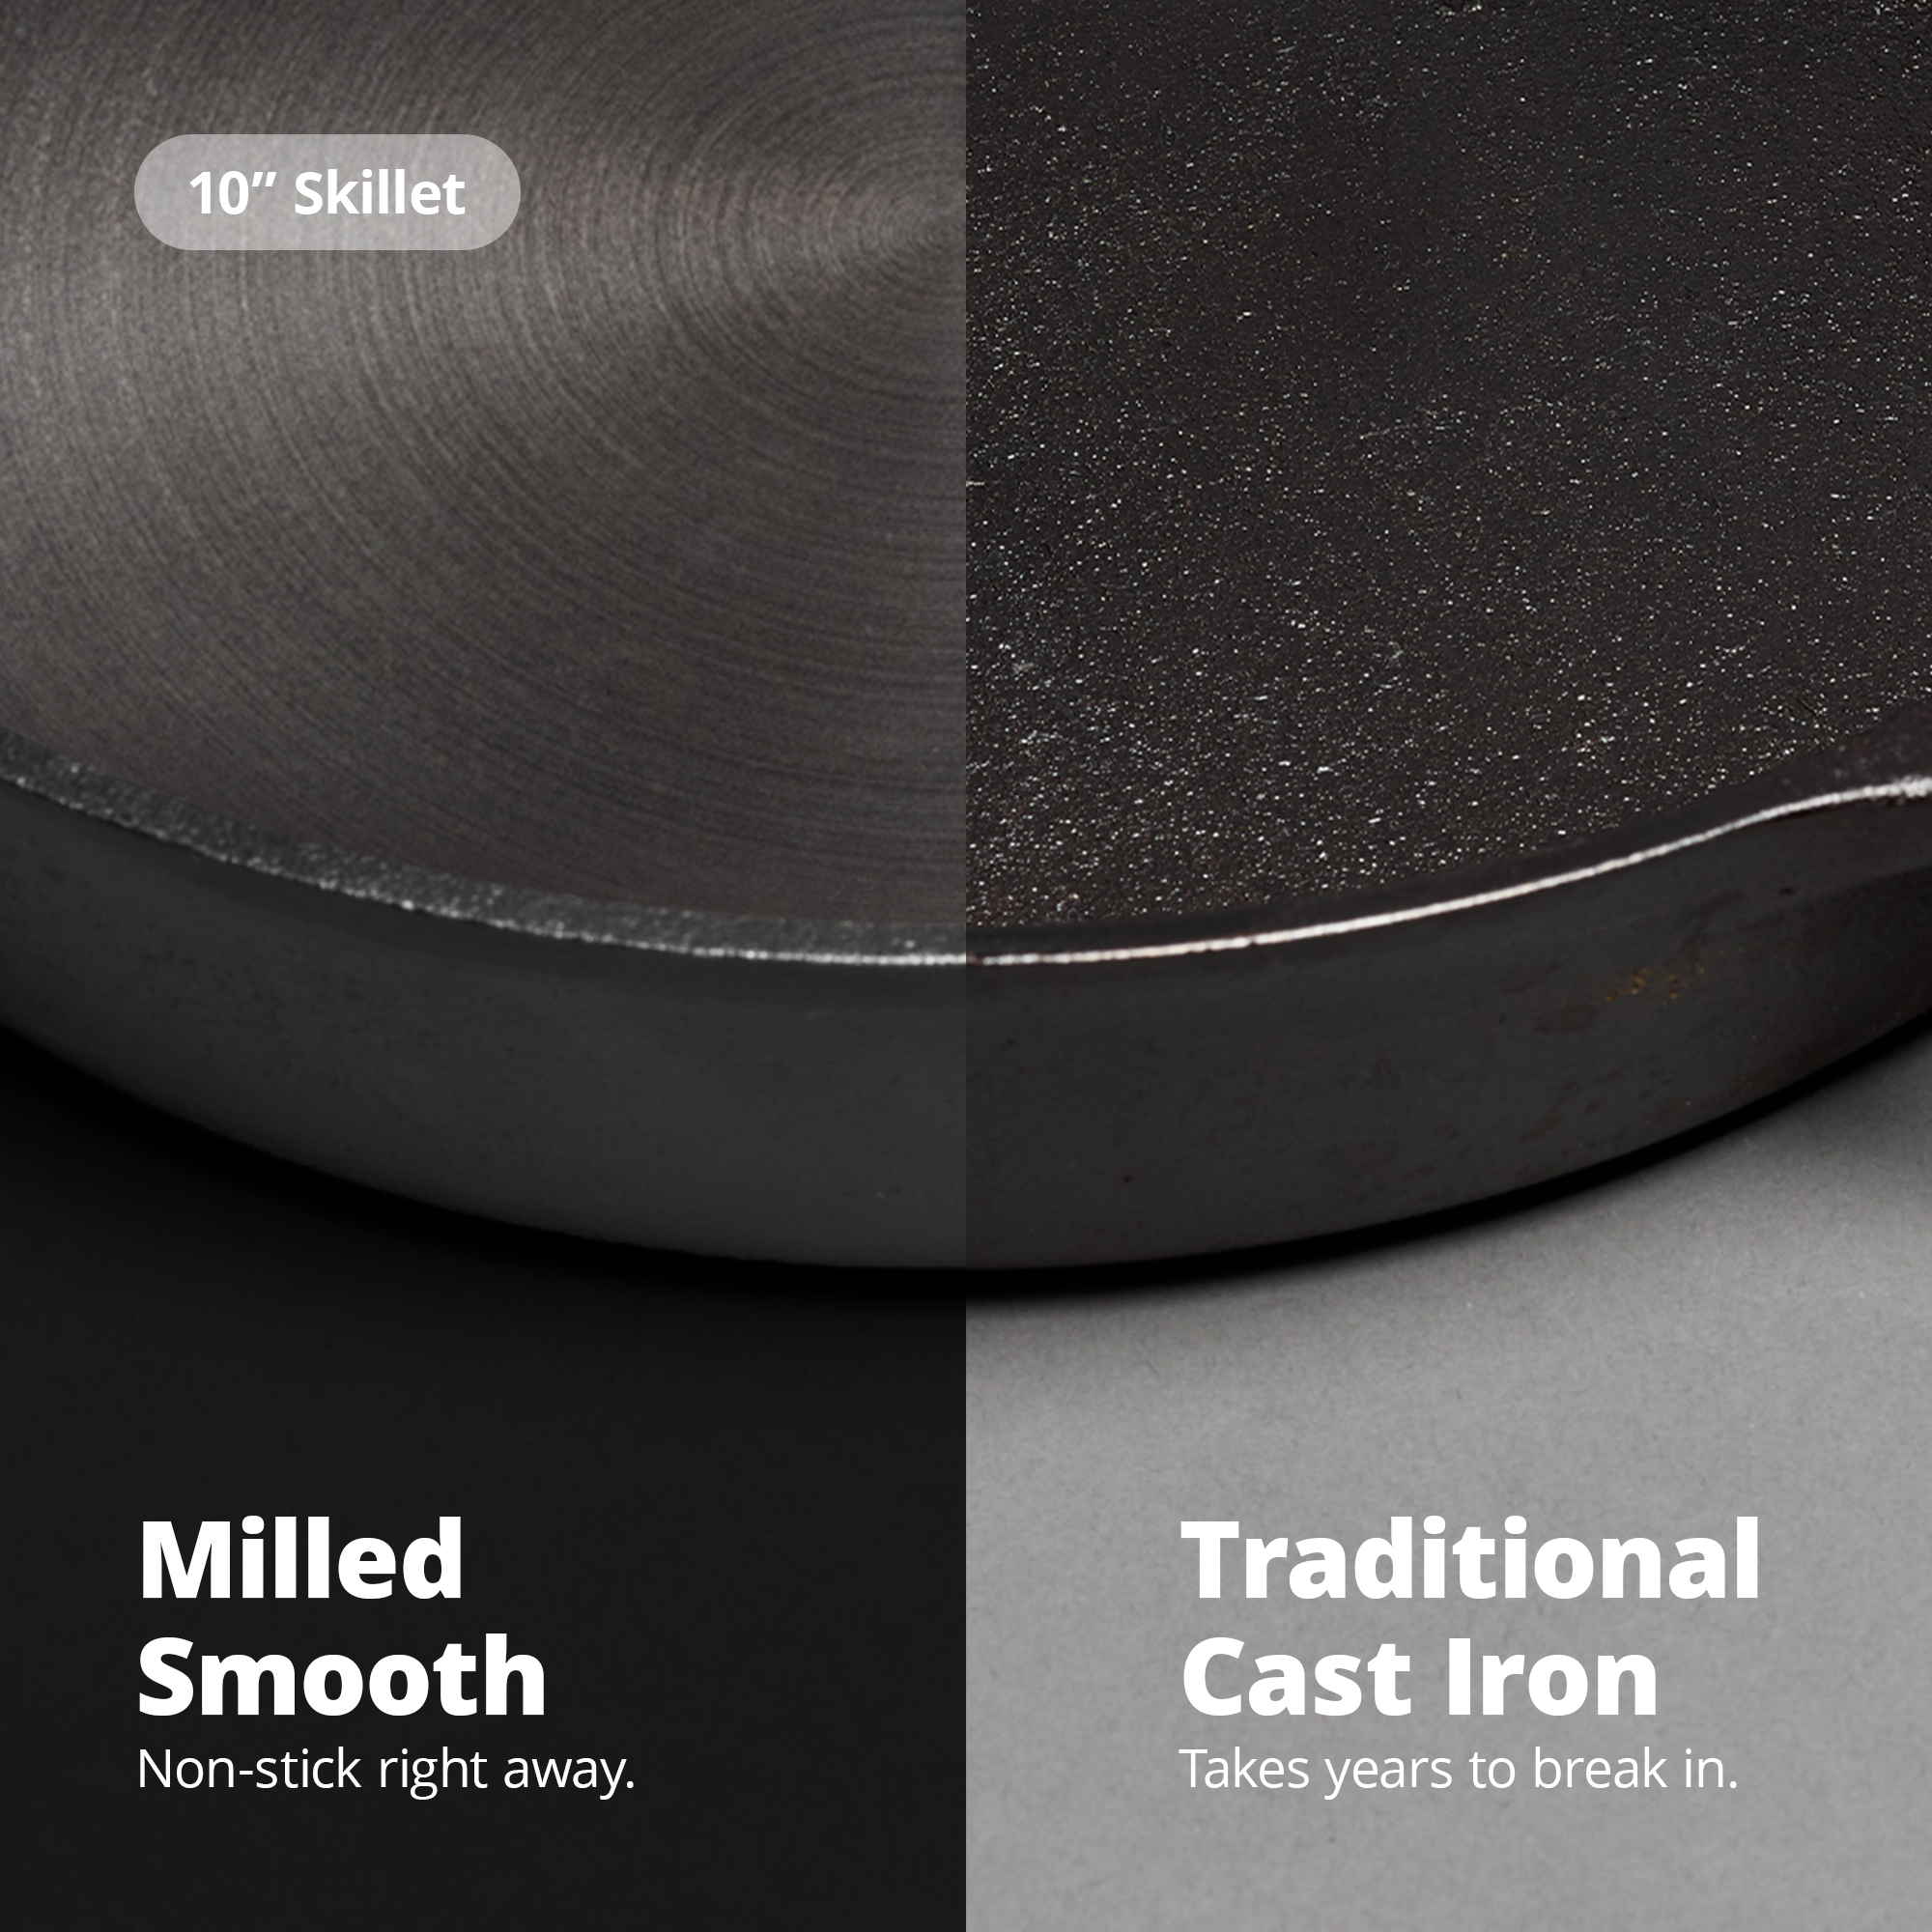 Greater Goods Cast Iron Skillet 10-Inch Pan, Cook Like a Pro with Smooth Milled, Organically Pre-Seasoned Skillet Surface, Designed in St. Louis - image 4 of 7